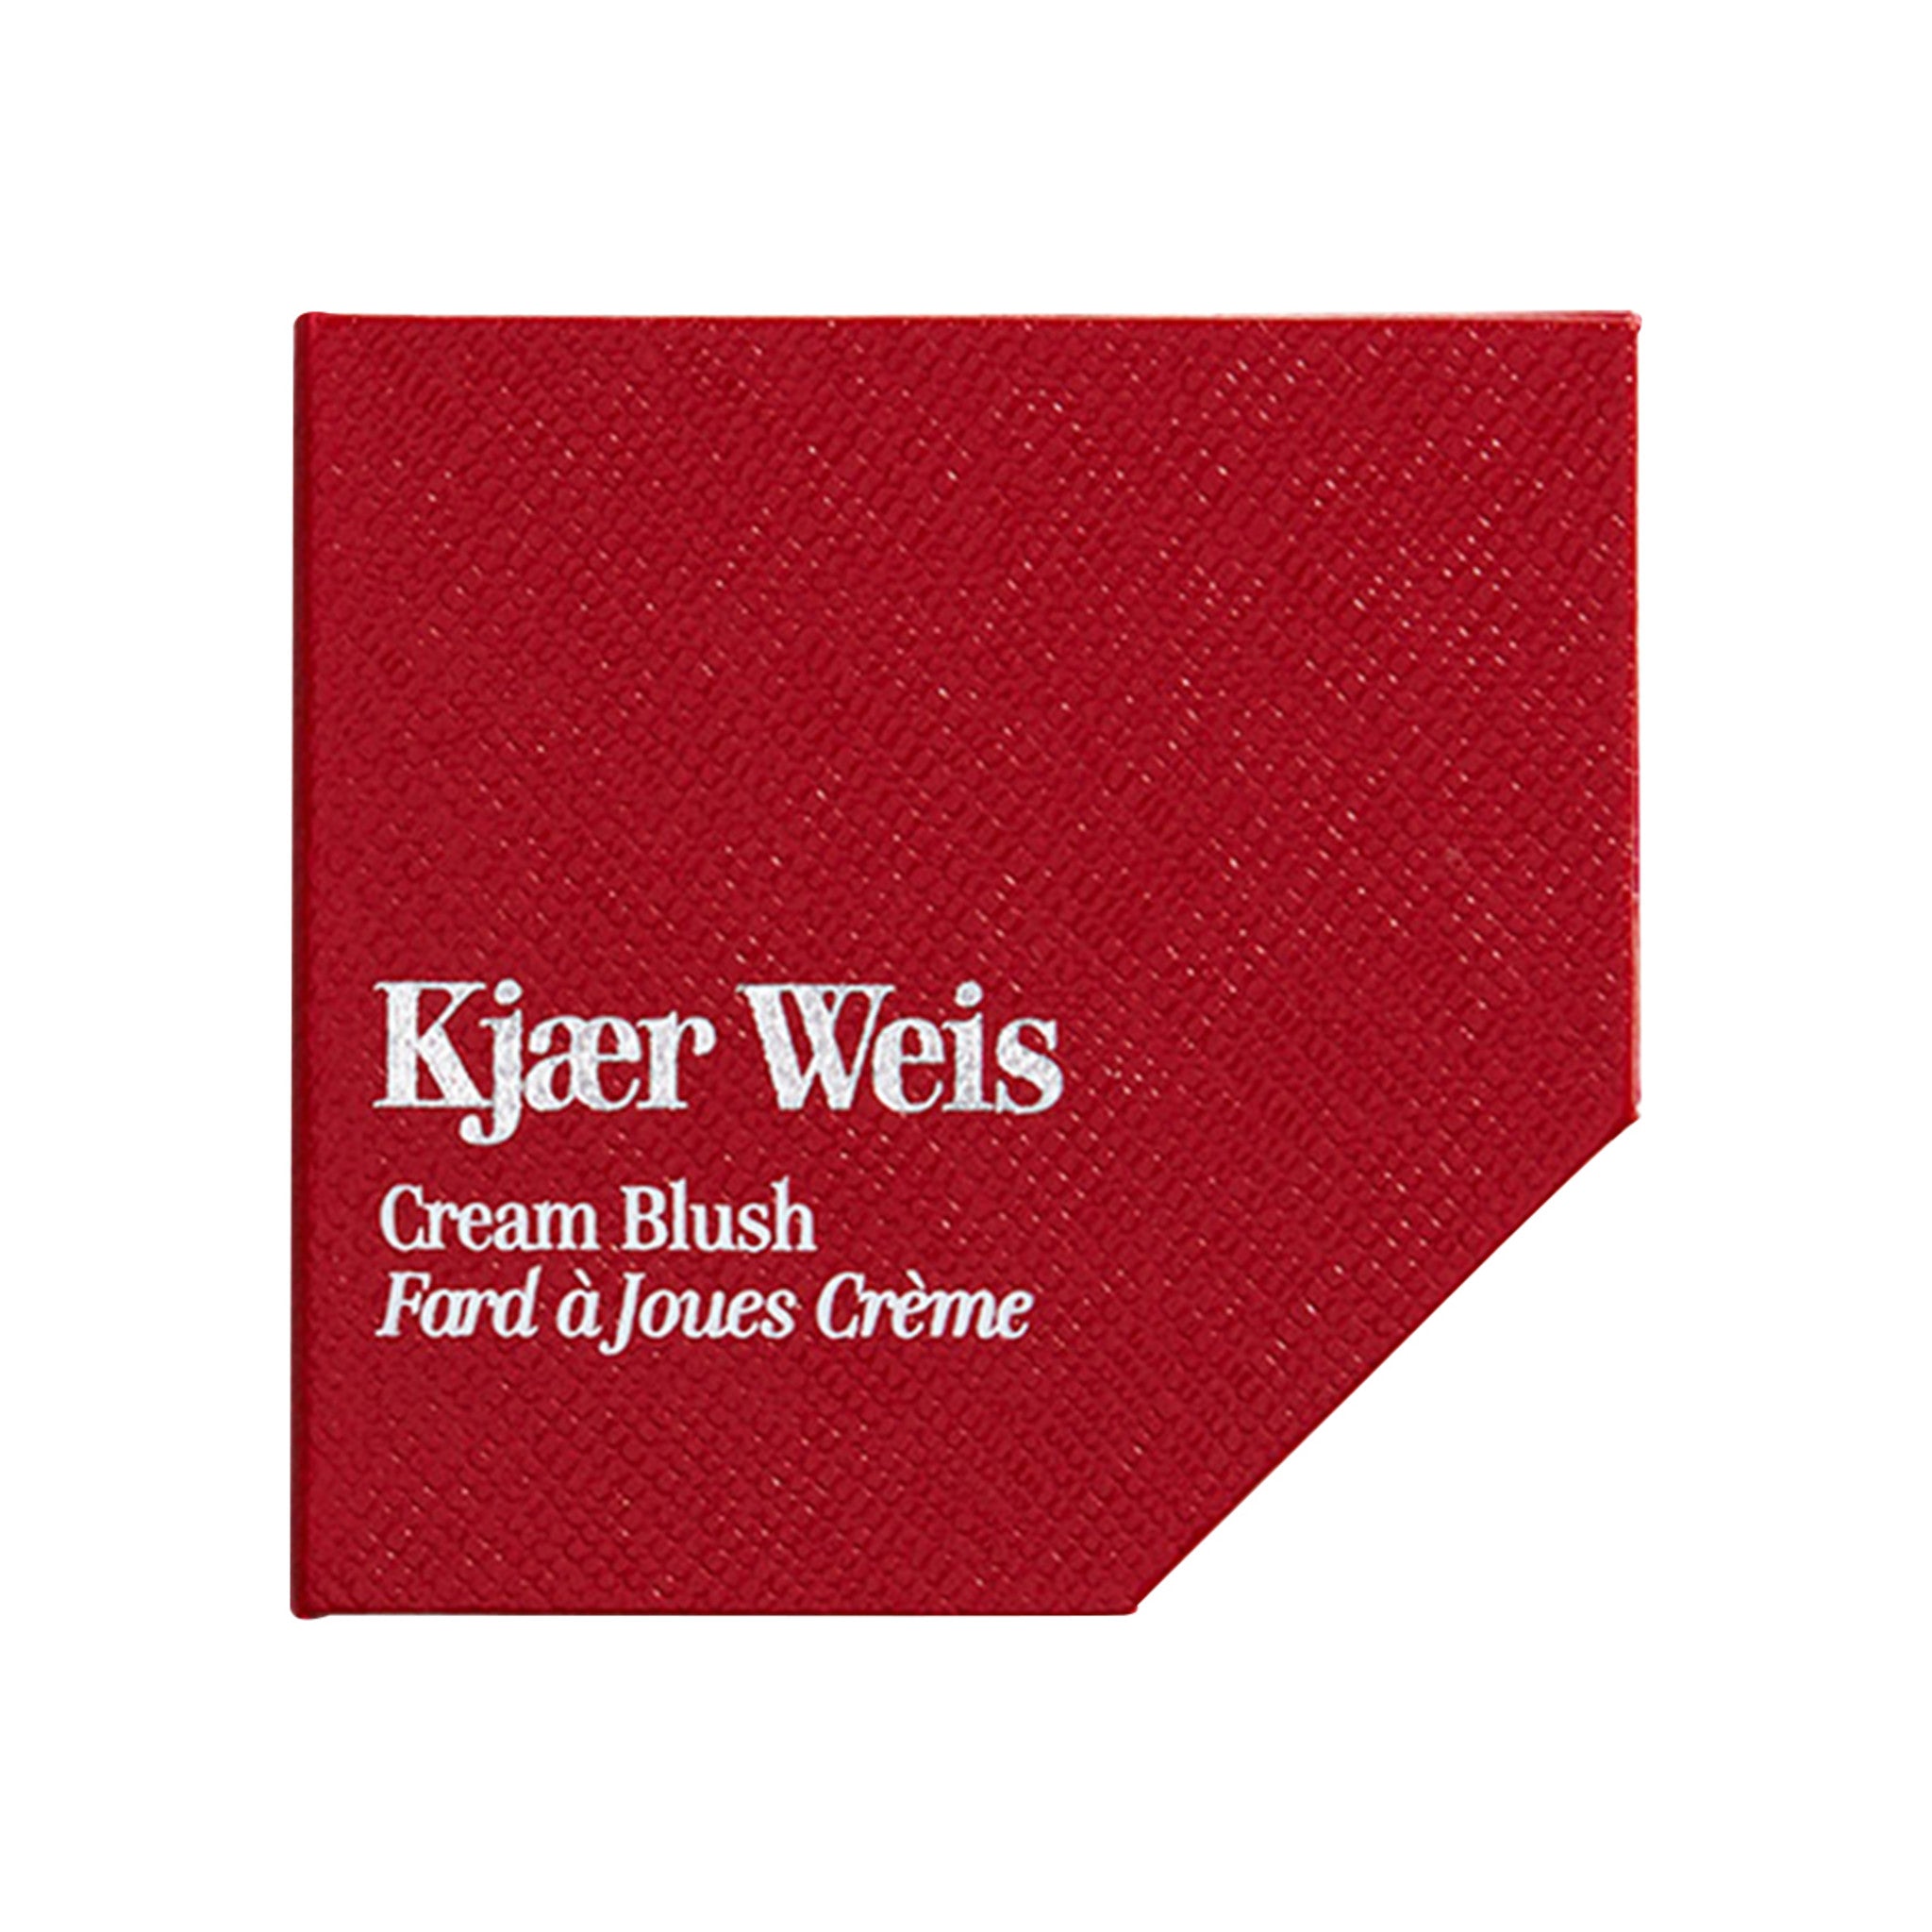 Kjaer Weis Red Edition Cream Blush Compact main image.